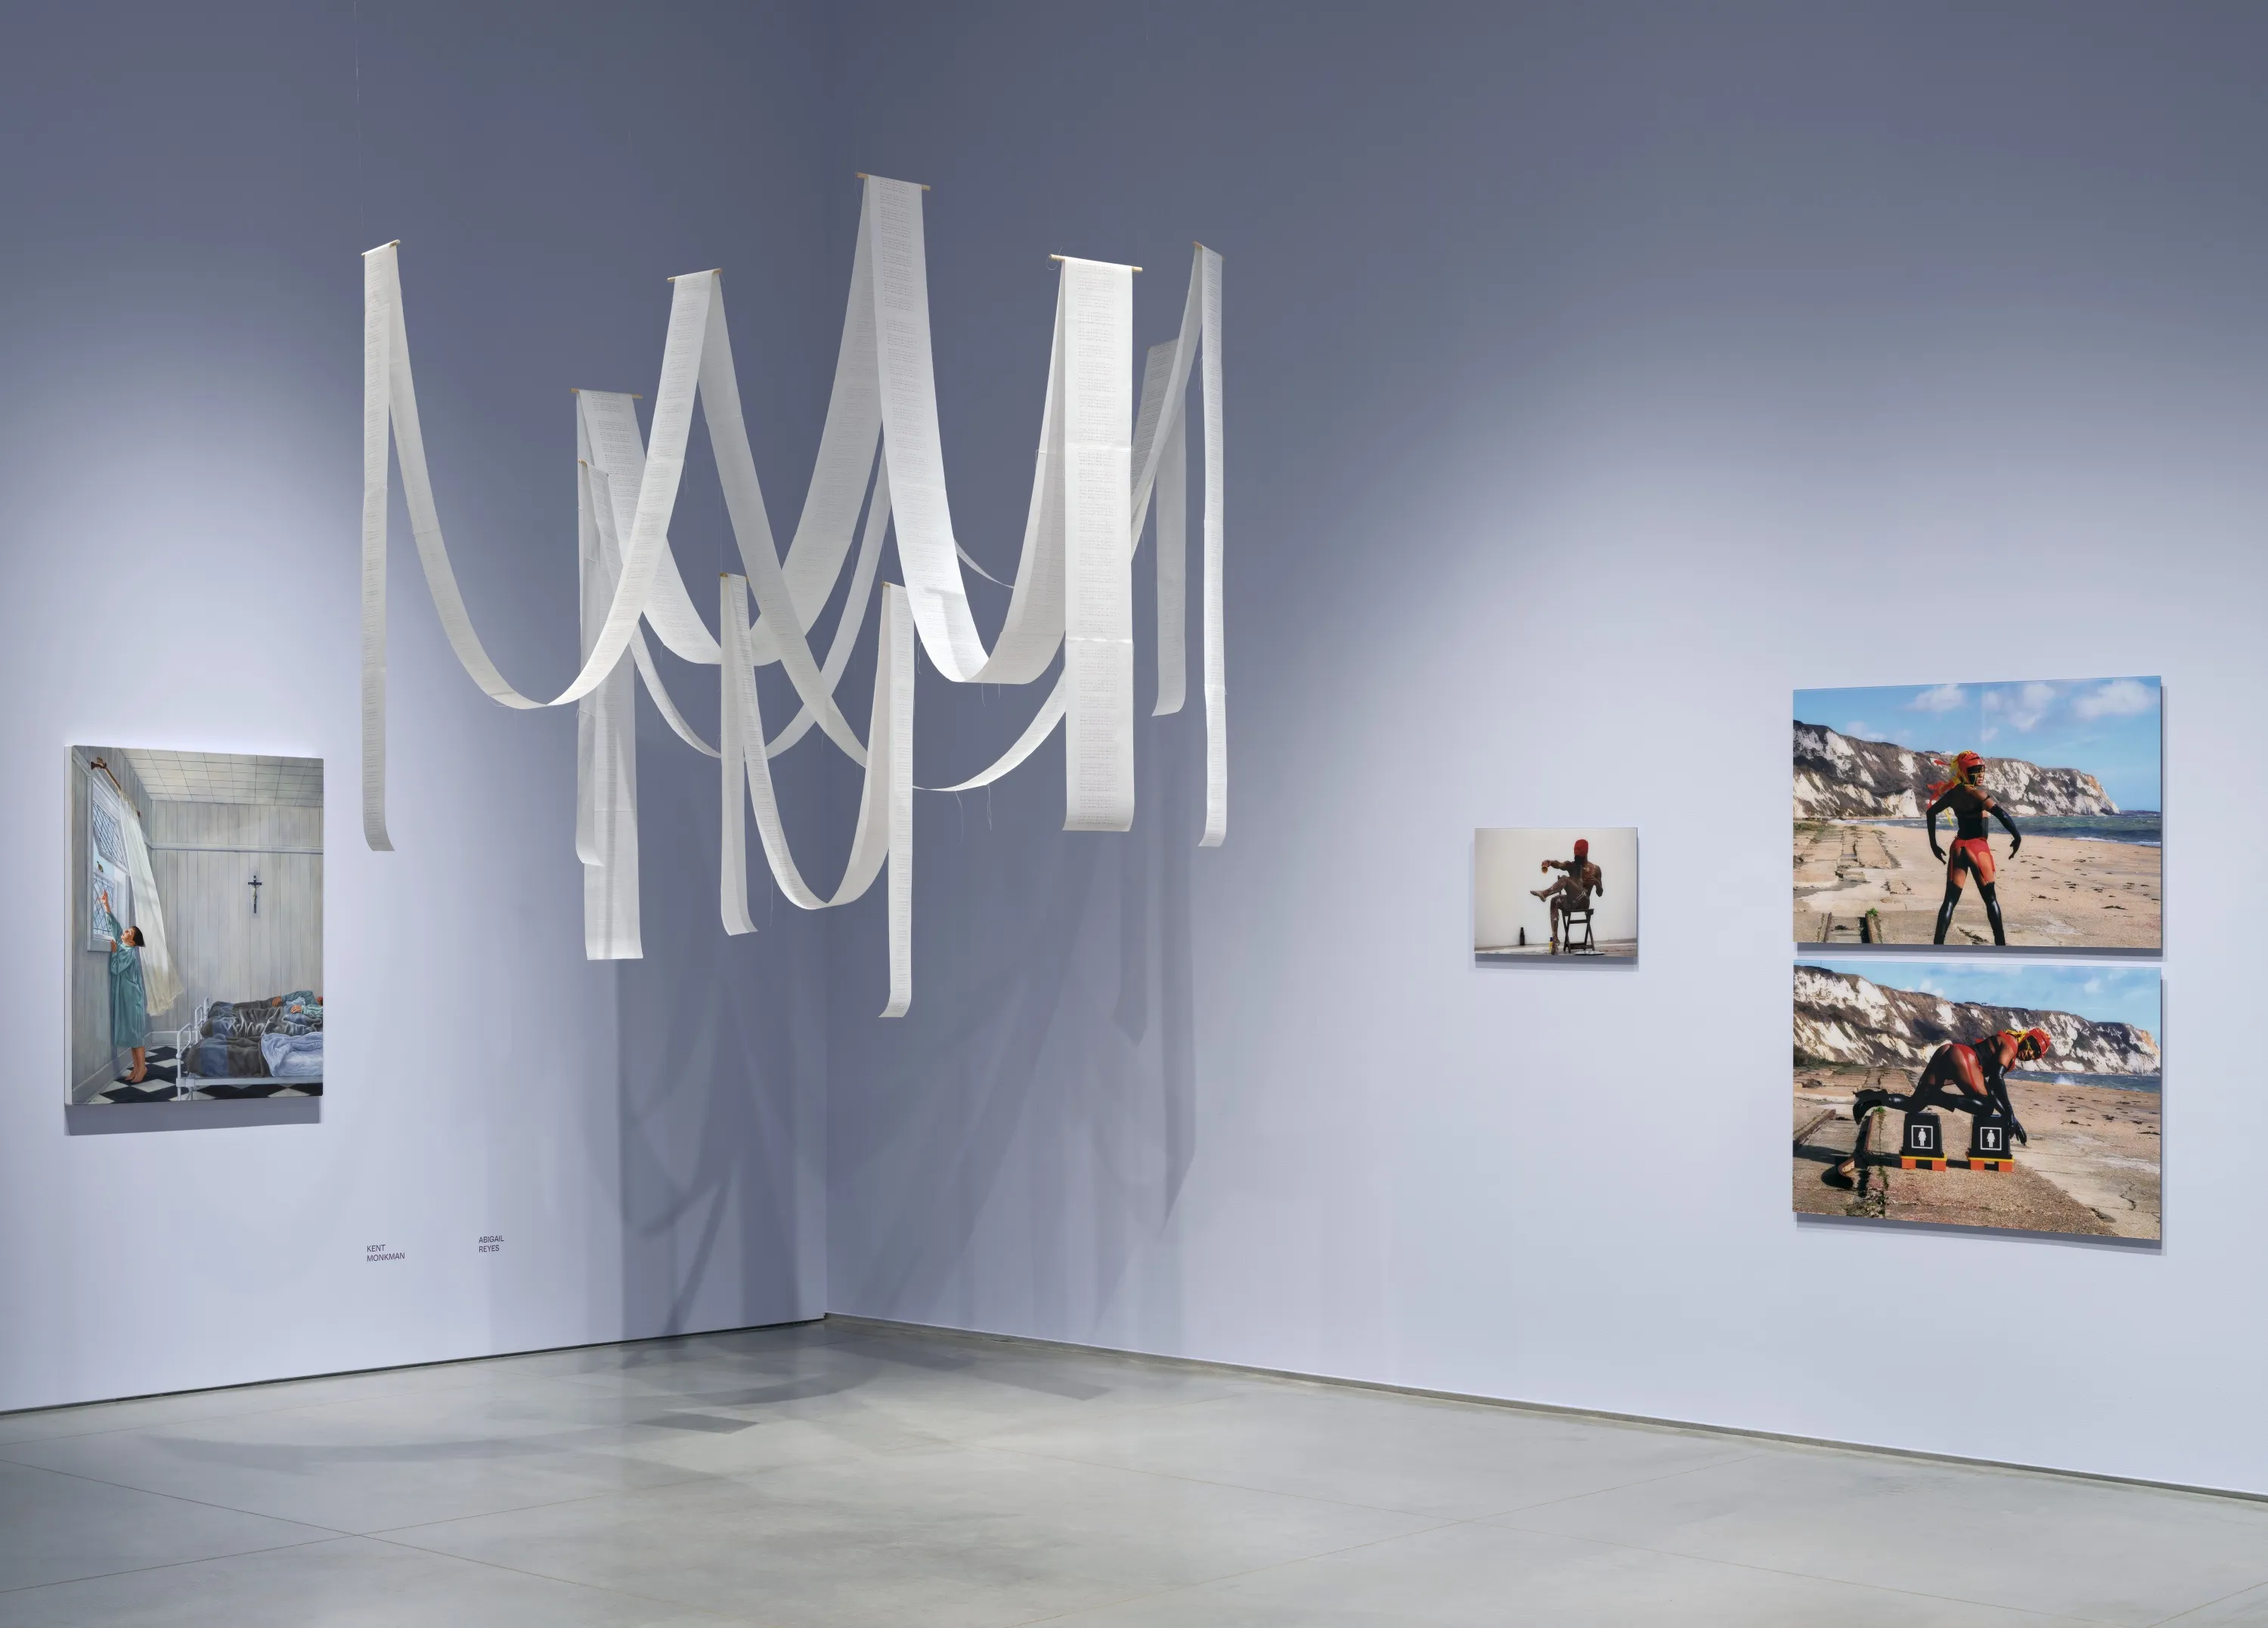 Gallery interior with light lavender walls and a gray floor. An acrylic painting is mounted on the left wall. And an artwork installation of long ribbons of white paper is hanging vertically and in dipped arcs in the middle. And on the right wall, are three photographs mounted on the wall - the photos have a central Black femme person in different poses.